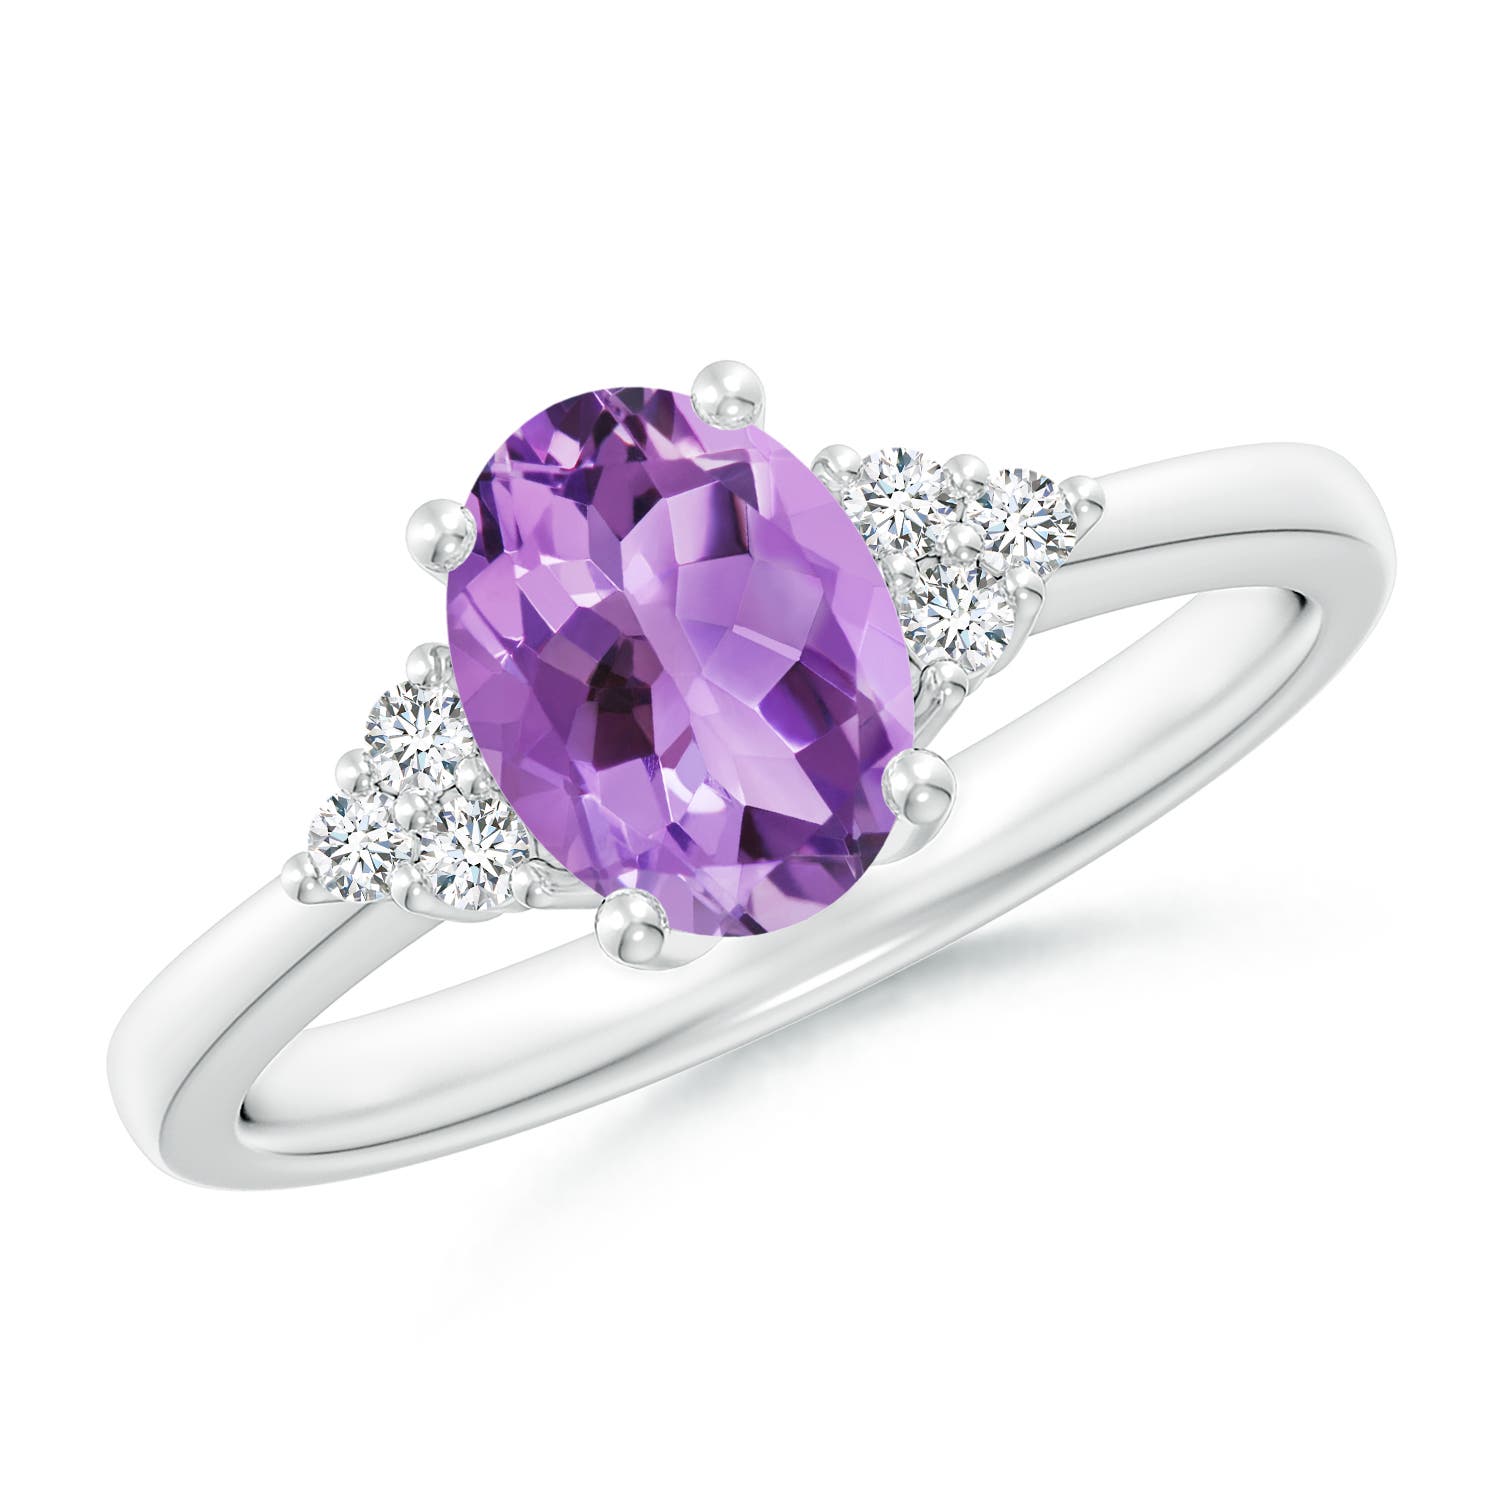 A - Amethyst / 1.26 CT / 14 KT White Gold